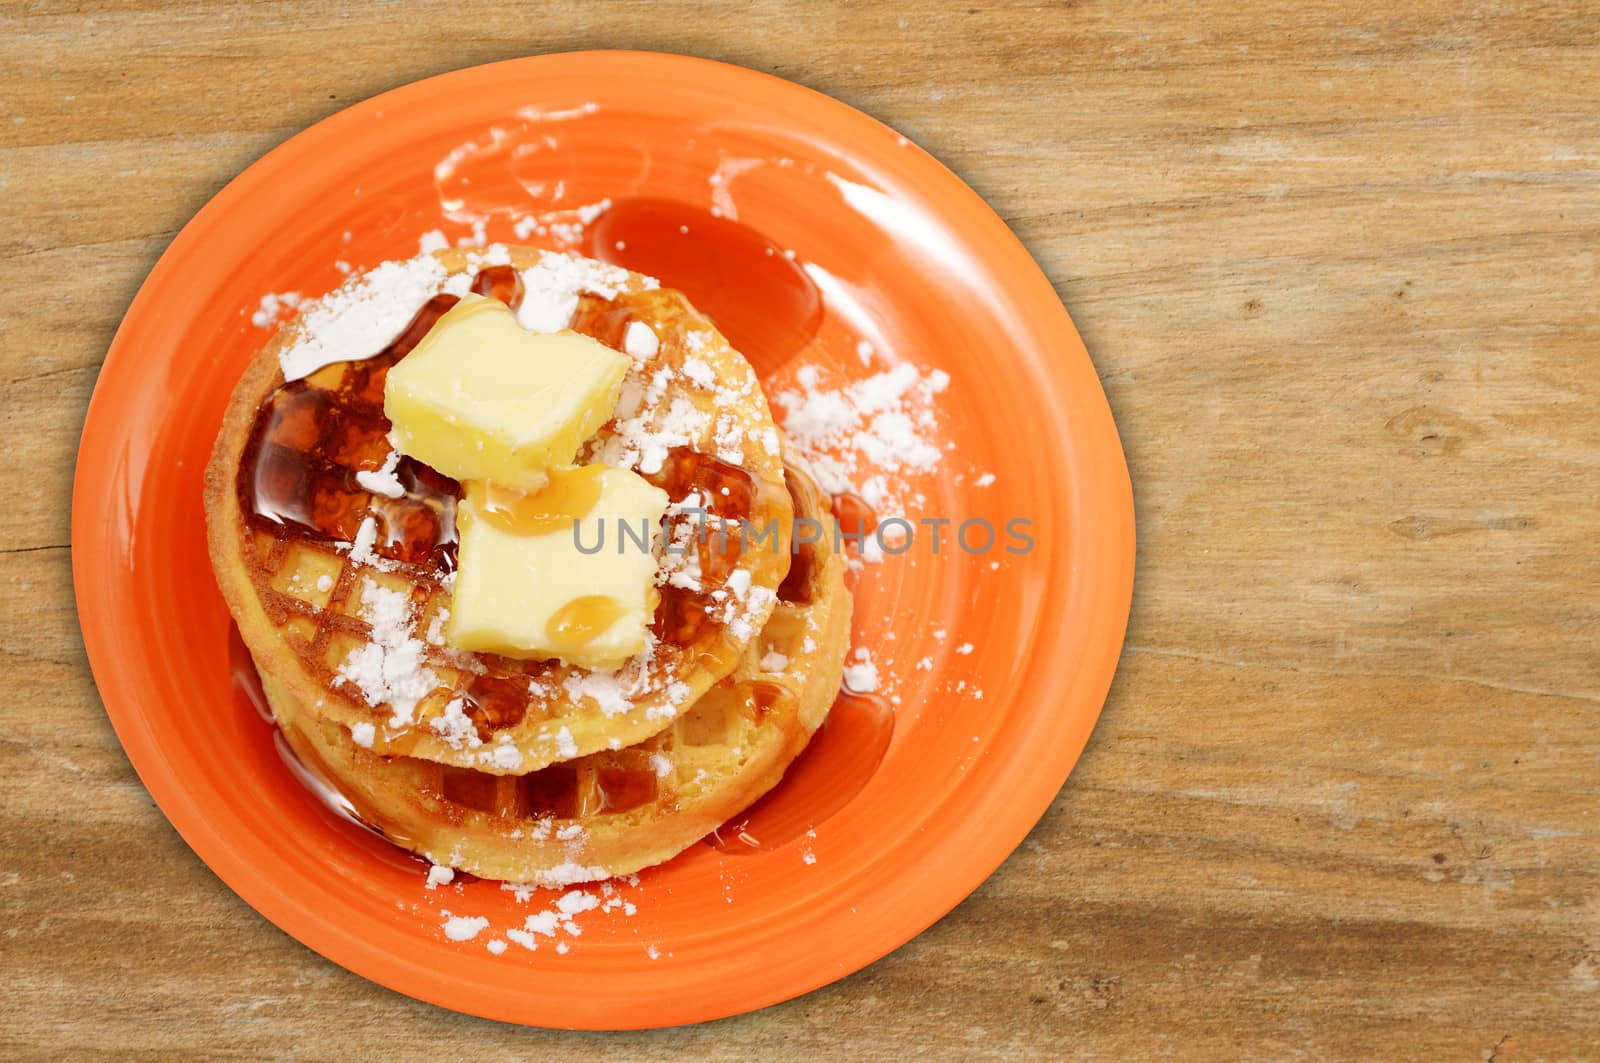 waffles on wood background by ftlaudgirl